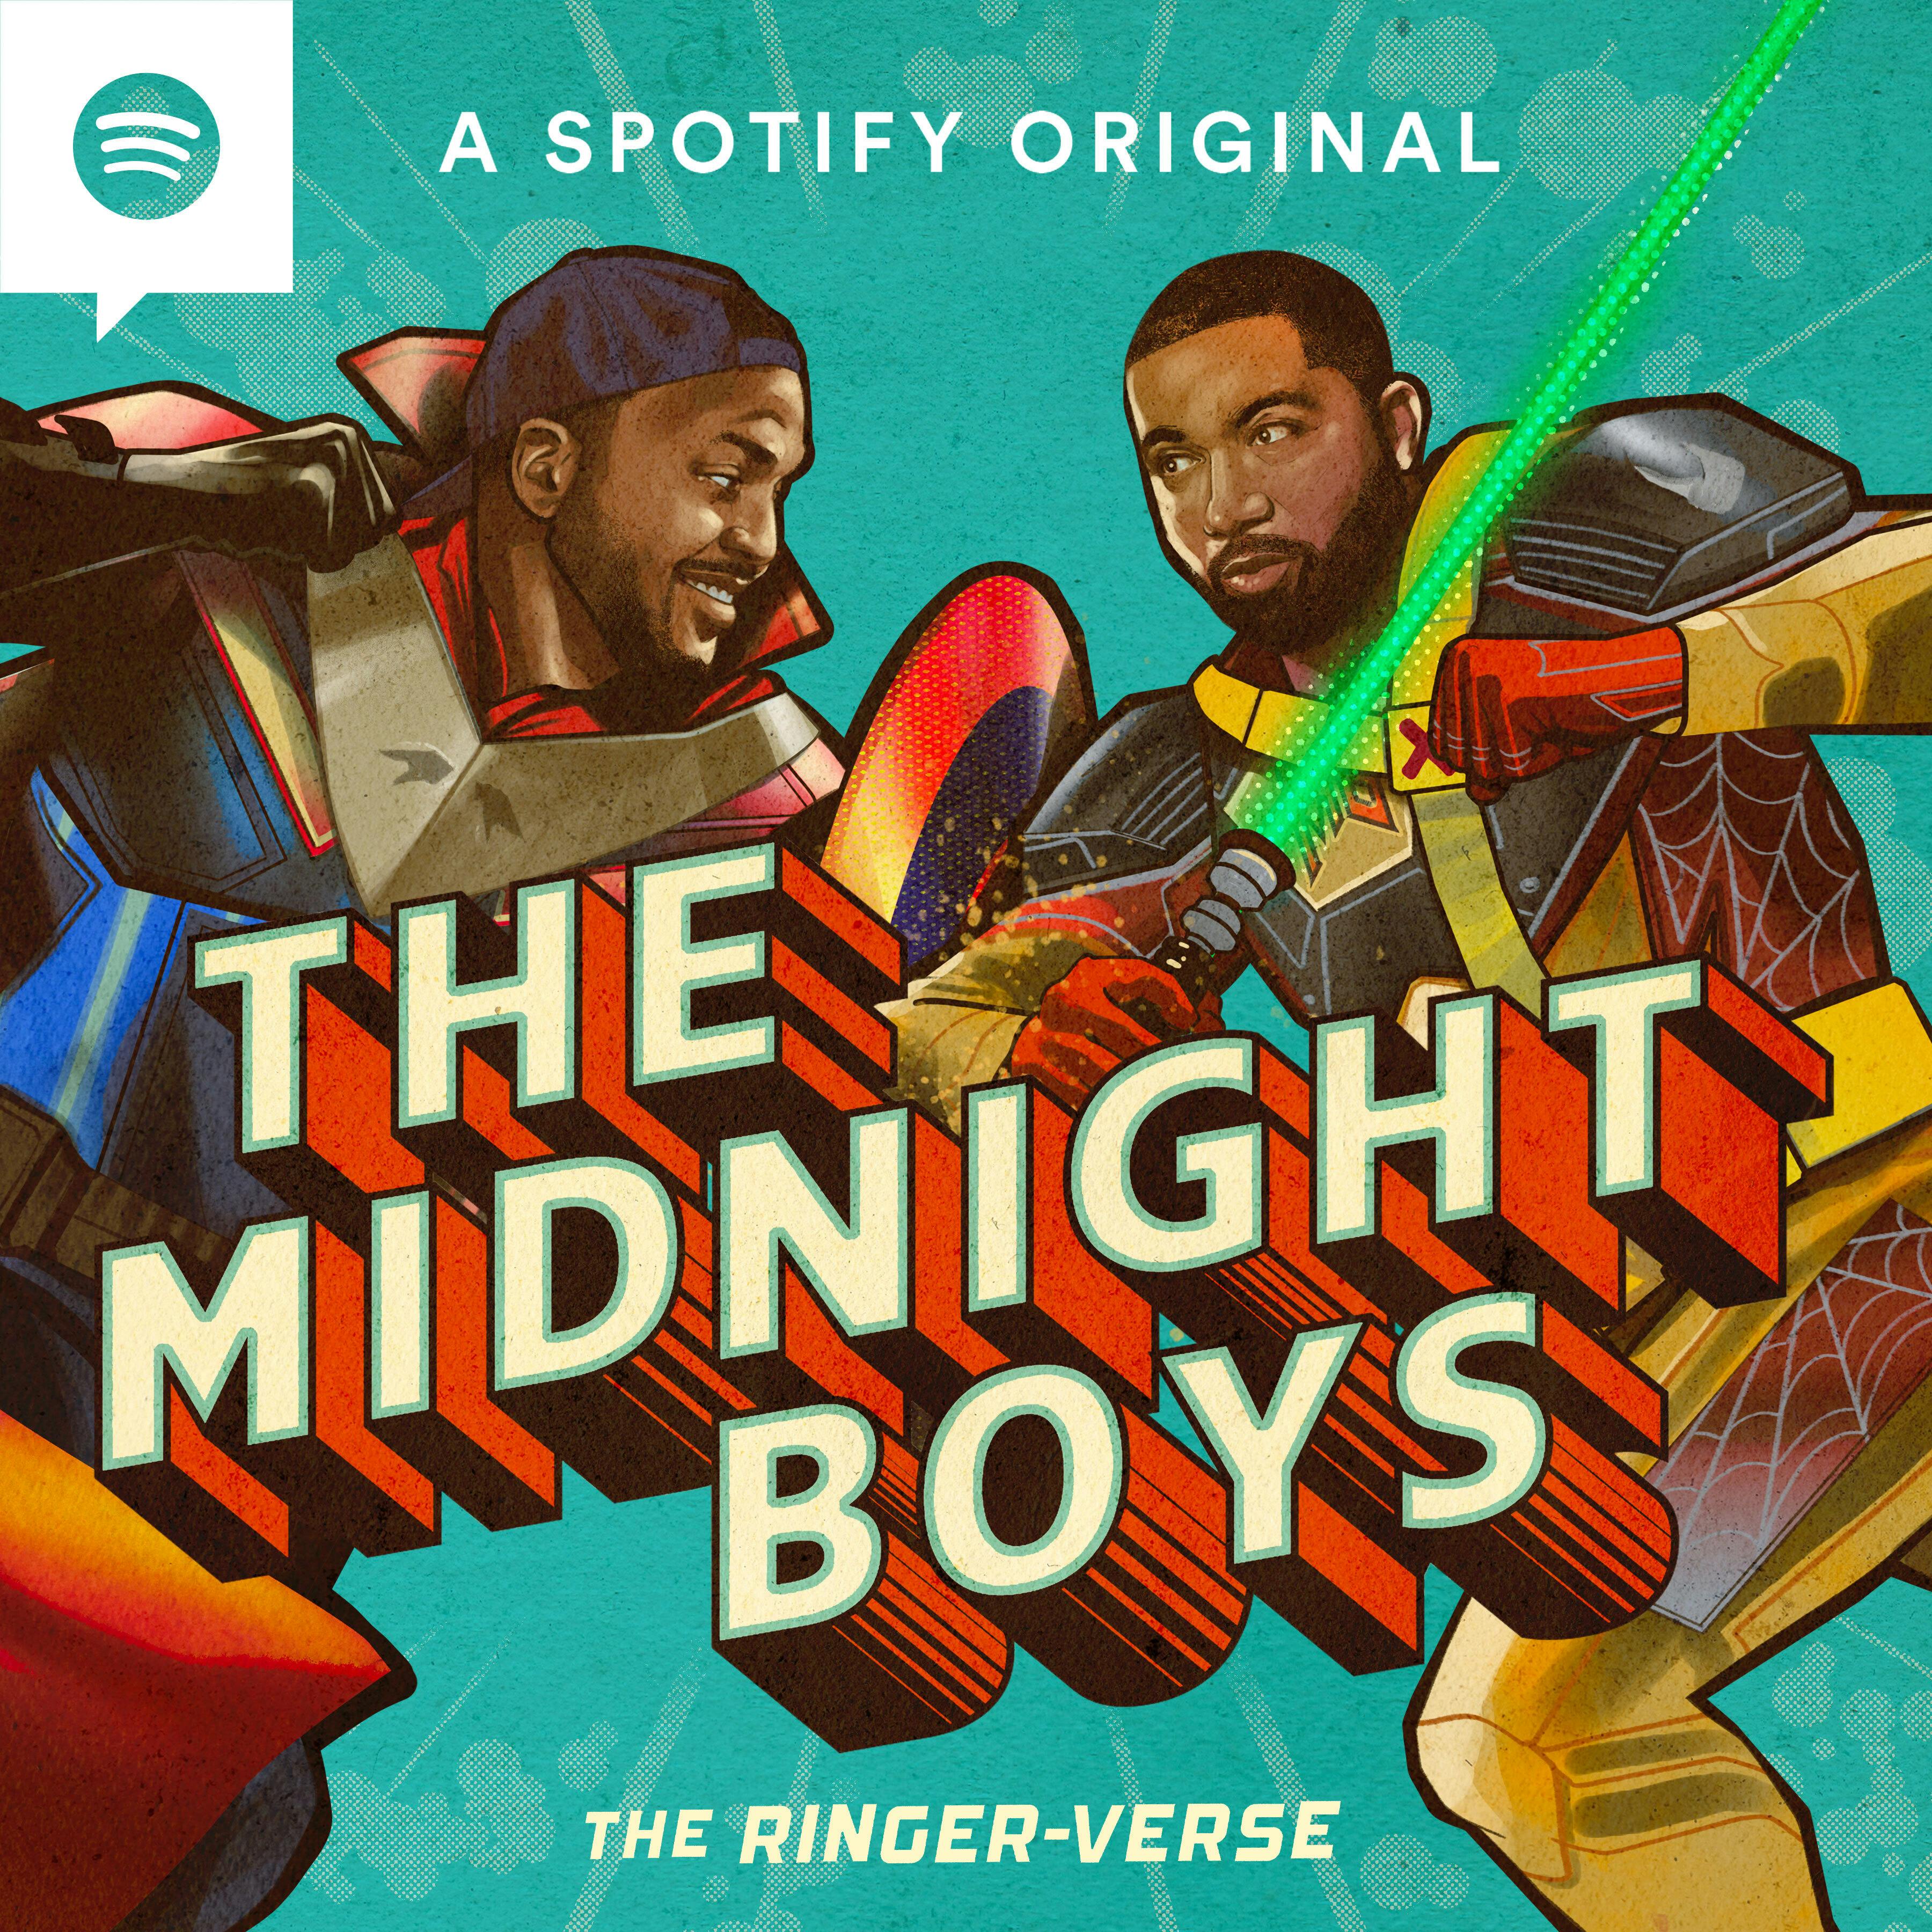 ’Secret Invasion’ Episode 2 Instant Reactions, and the Superman Casting News | The Midnight Boys